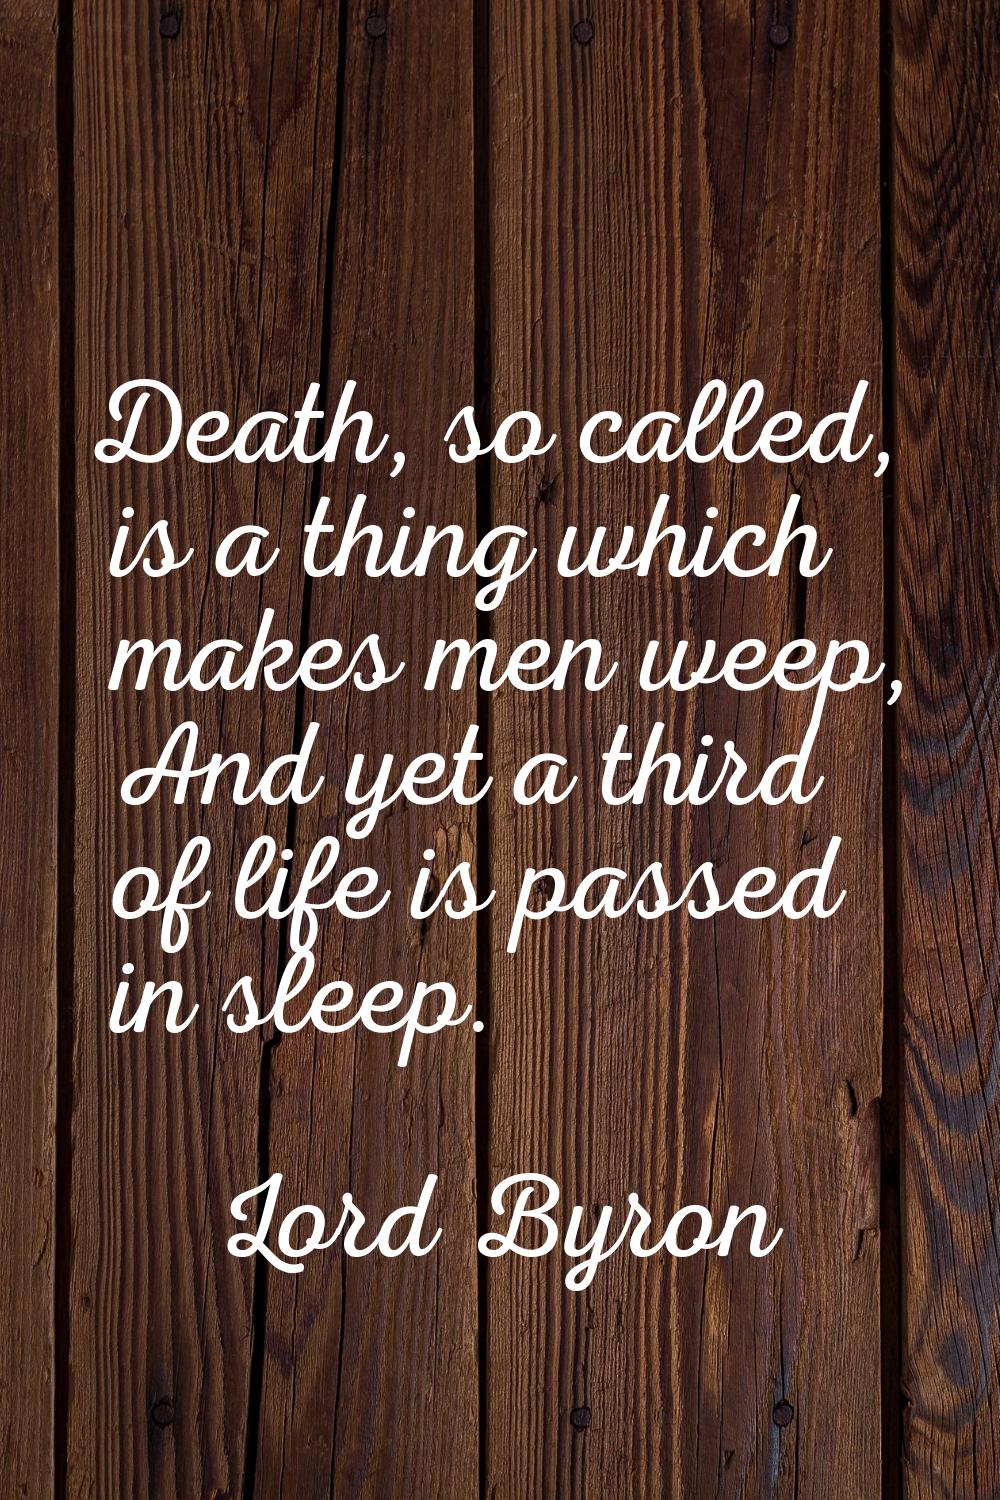 Death, so called, is a thing which makes men weep, And yet a third of life is passed in sleep.